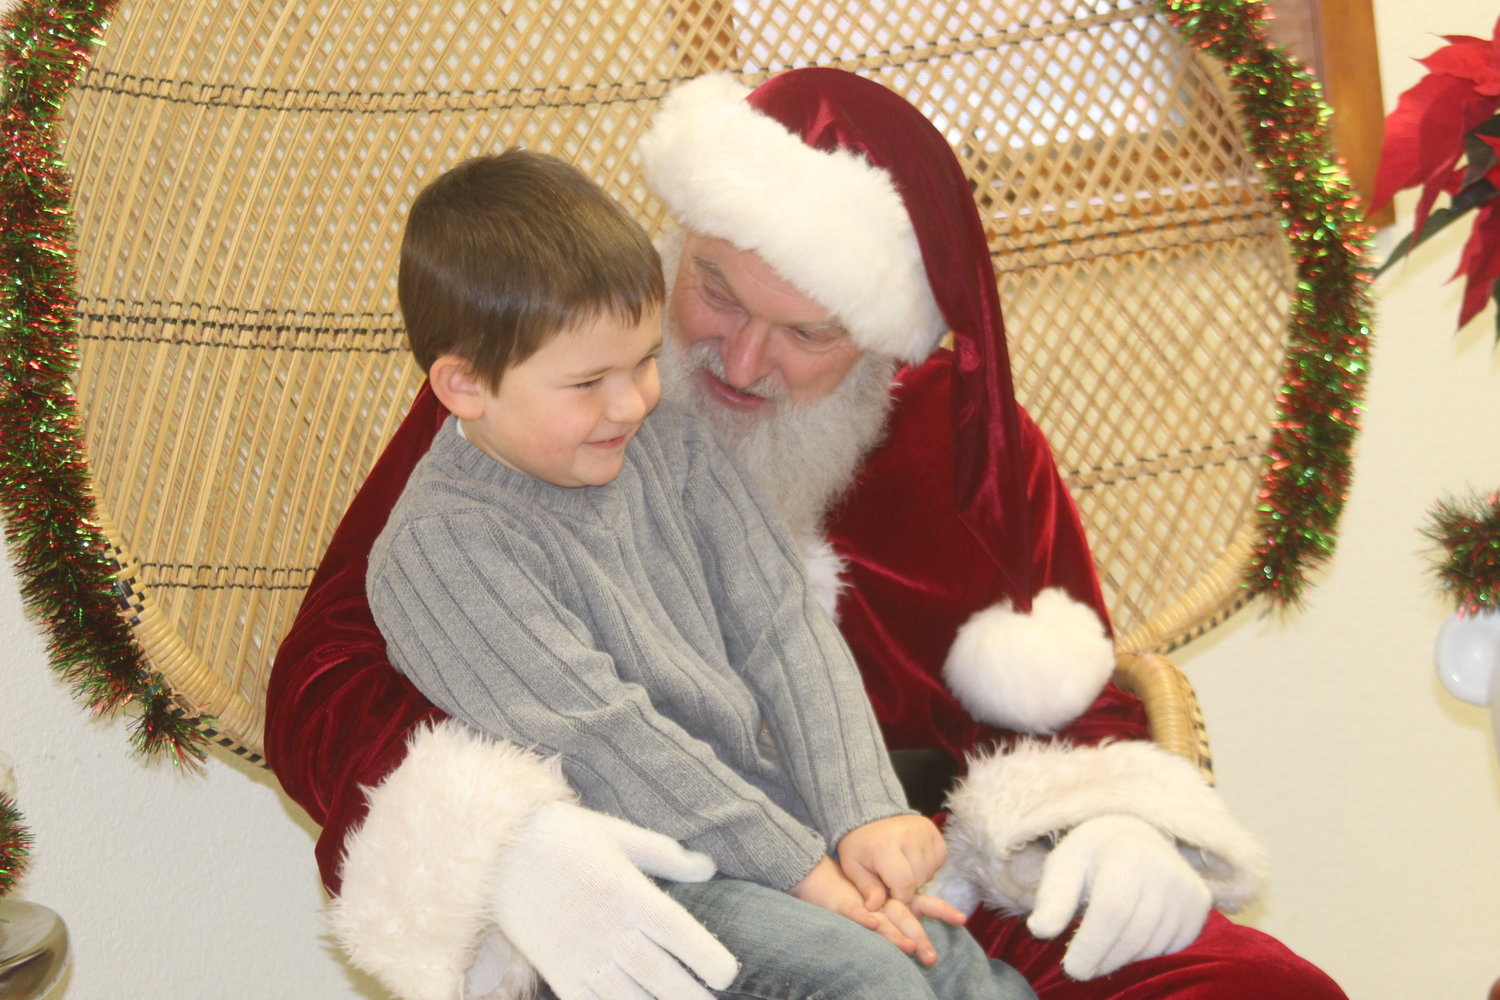 Santa gets a smile out of Brett Miller at the Wellman Library on Saturday, Dec. 14.